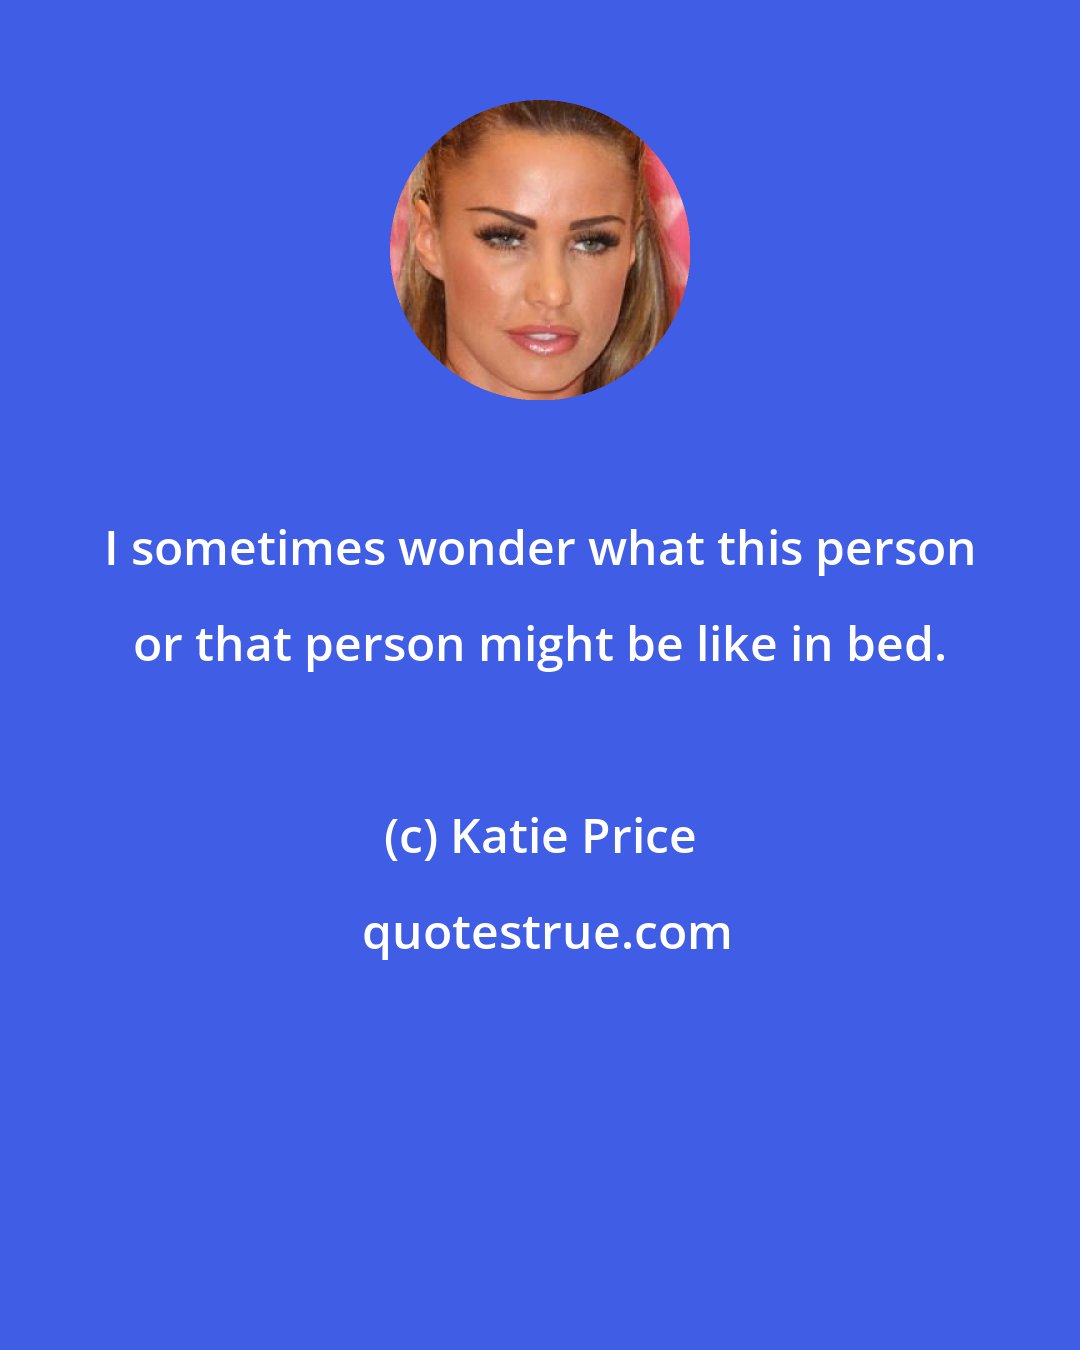 Katie Price: I sometimes wonder what this person or that person might be like in bed.